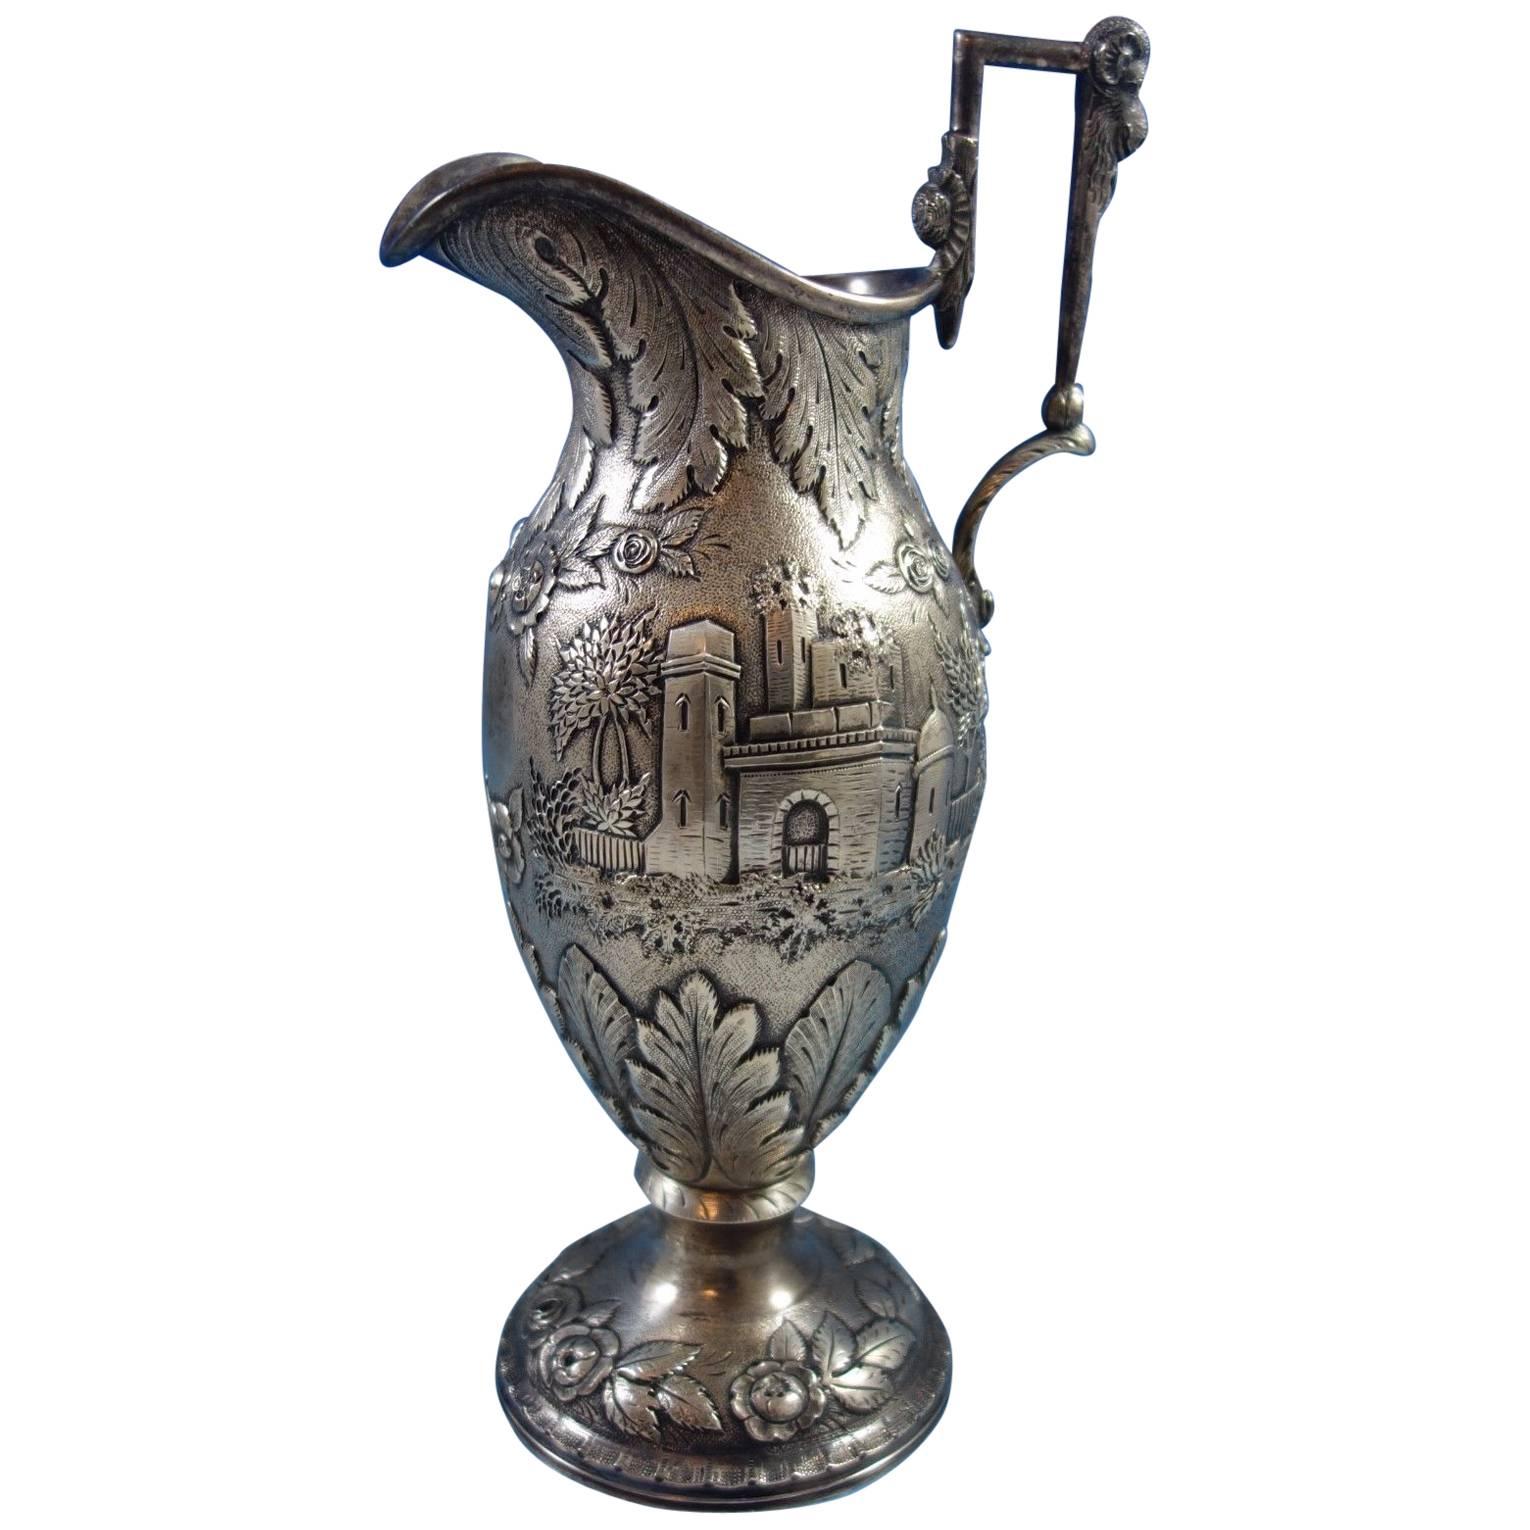 Repousse by AG Schultz Sterling Silver Milk Pitcher Architectural Castle, Leaves